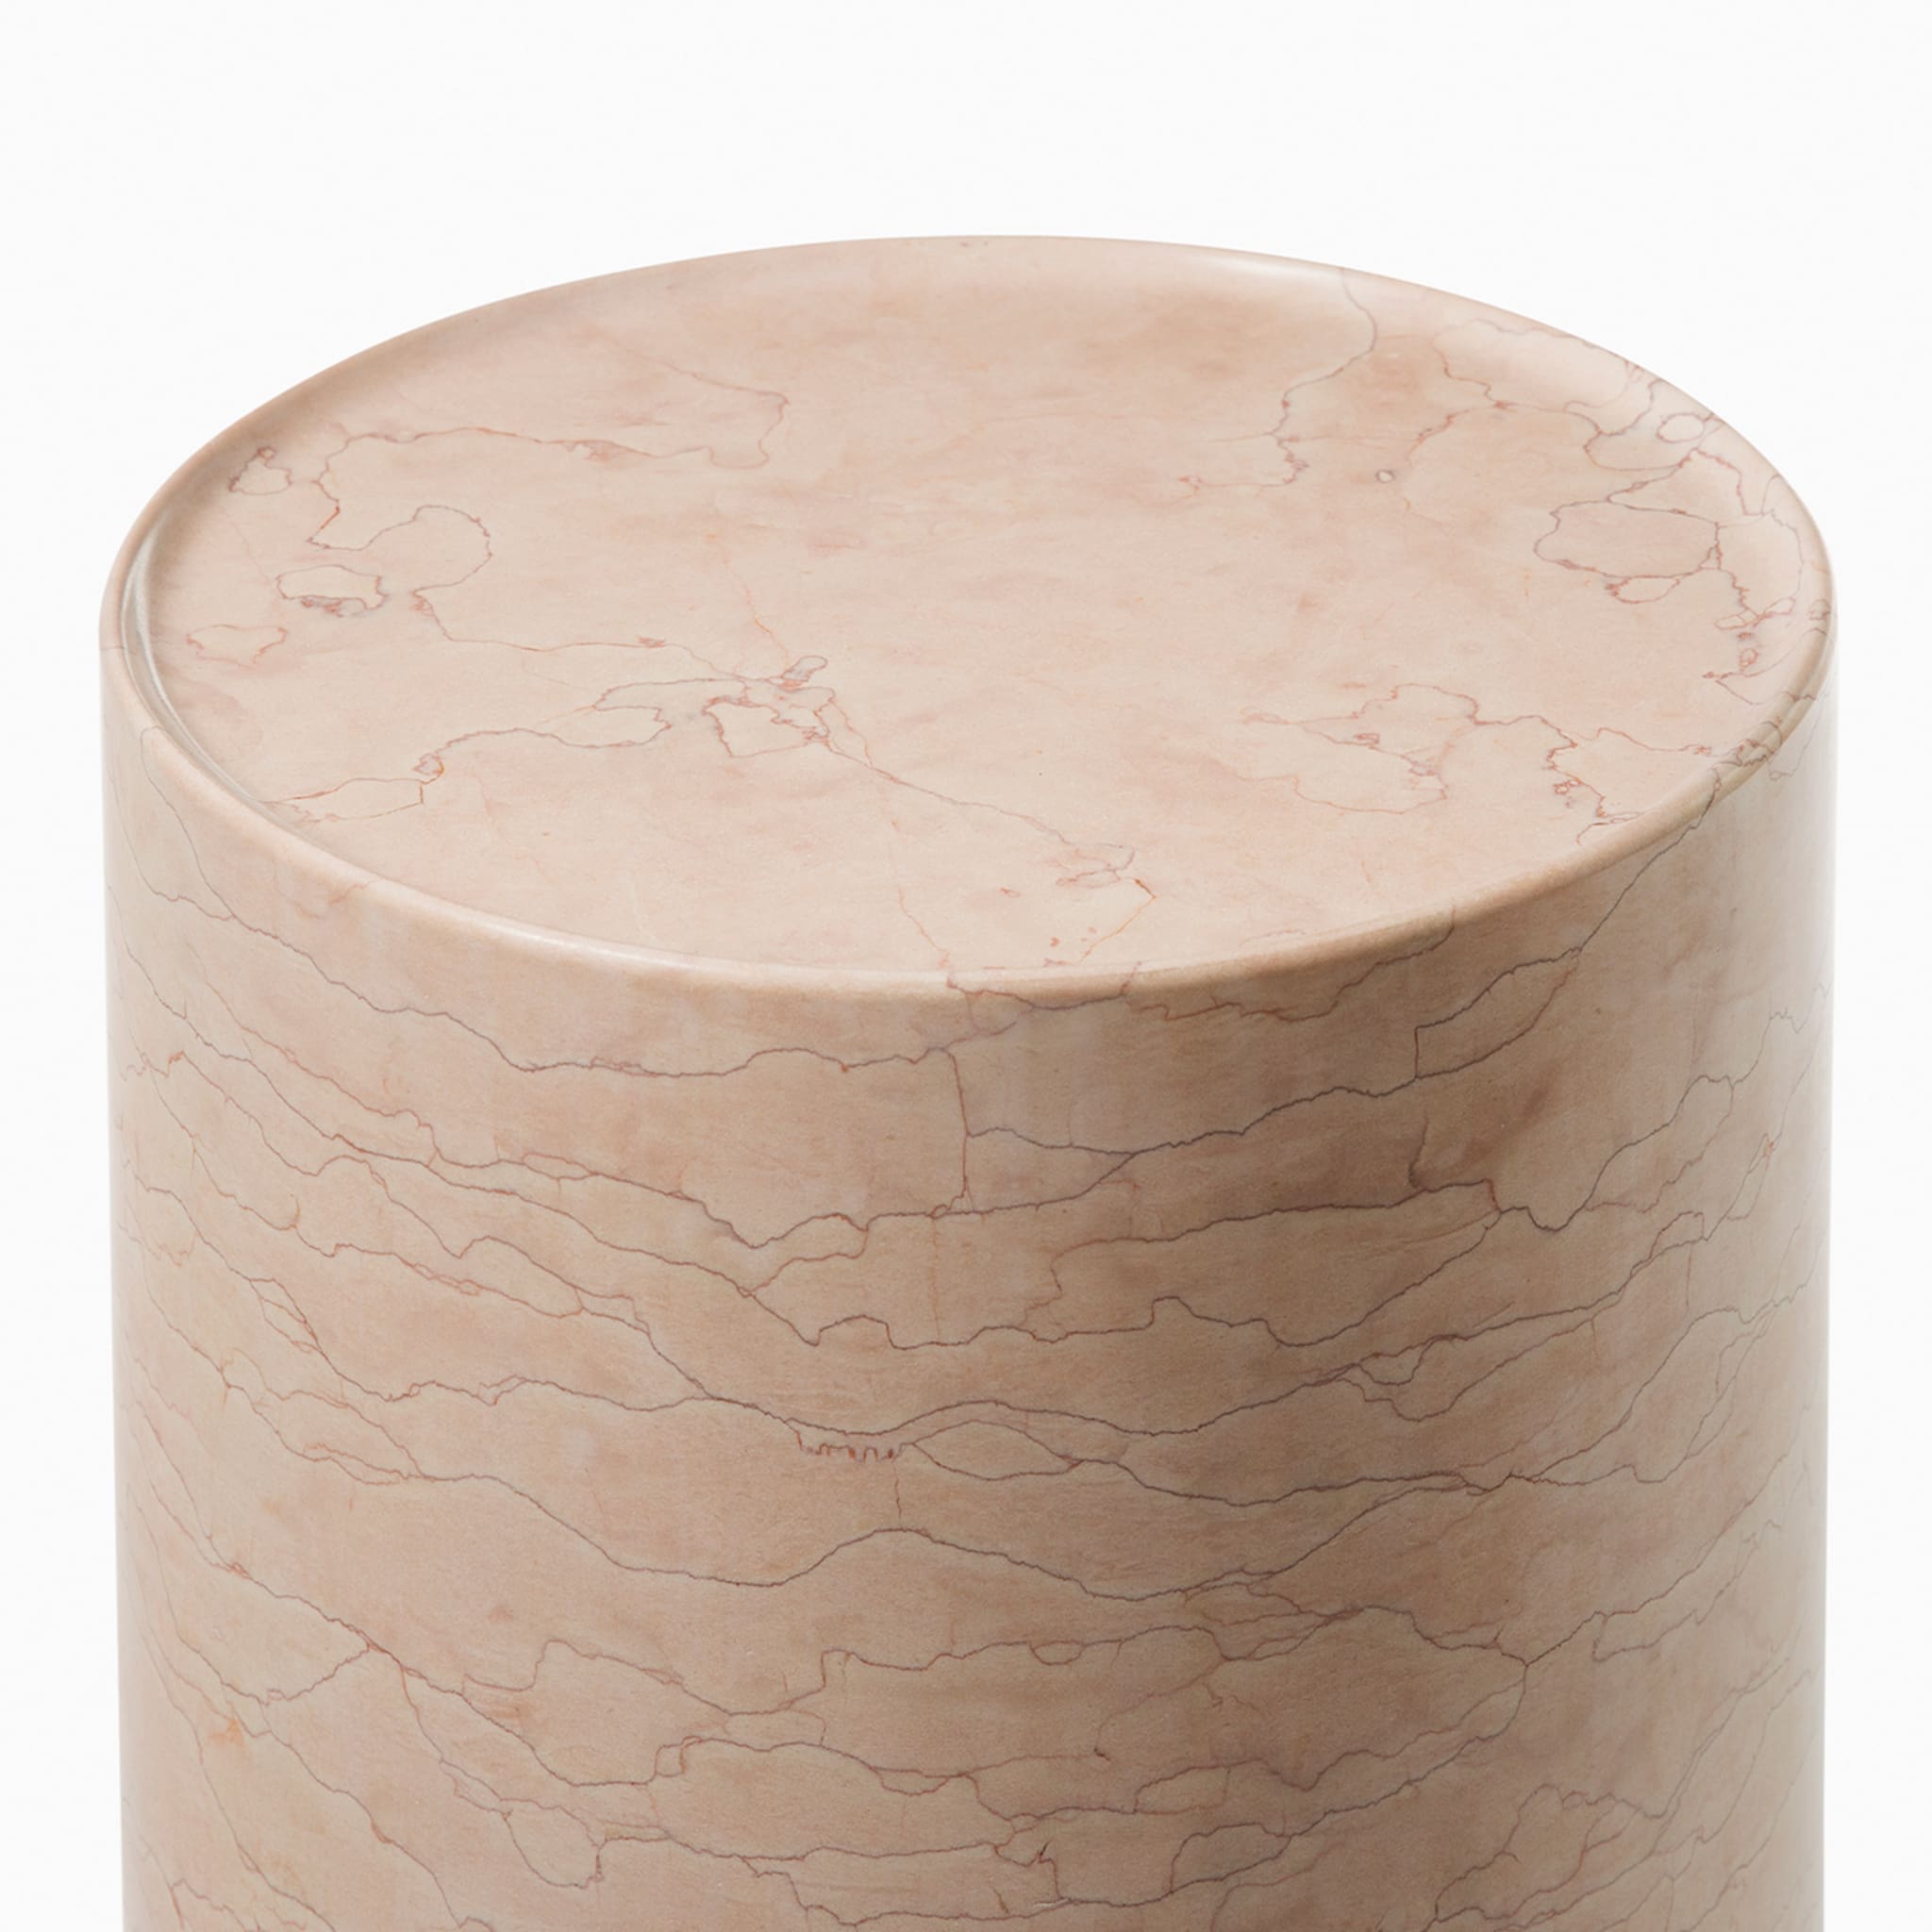 Amara Side Table in Pink Marble - Alternative view 2